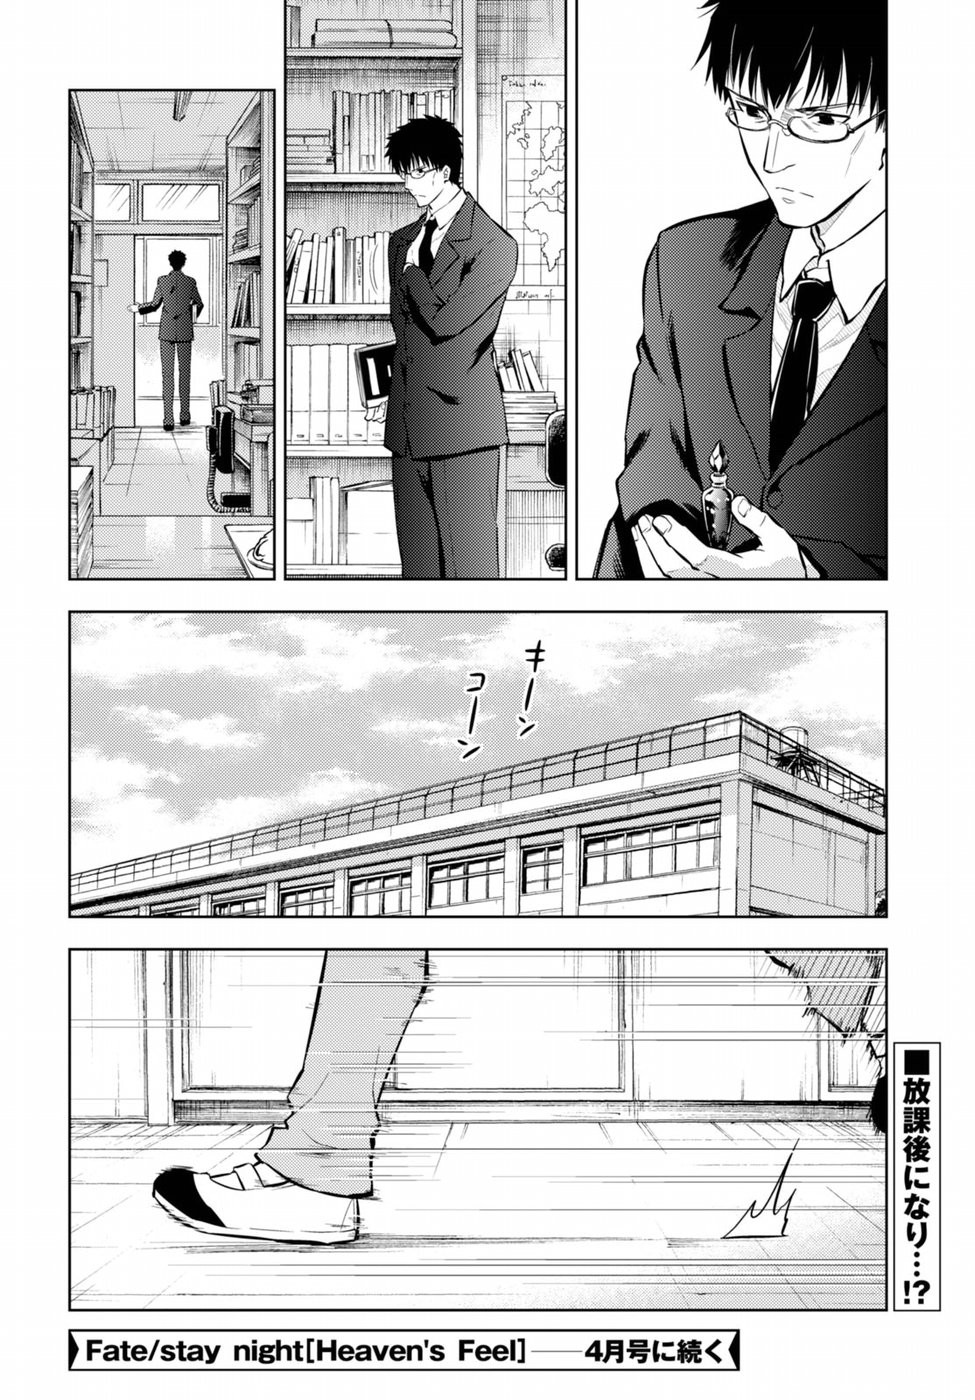 Fate/Stay night Heaven's Feel - Chapter 22 - Page 12